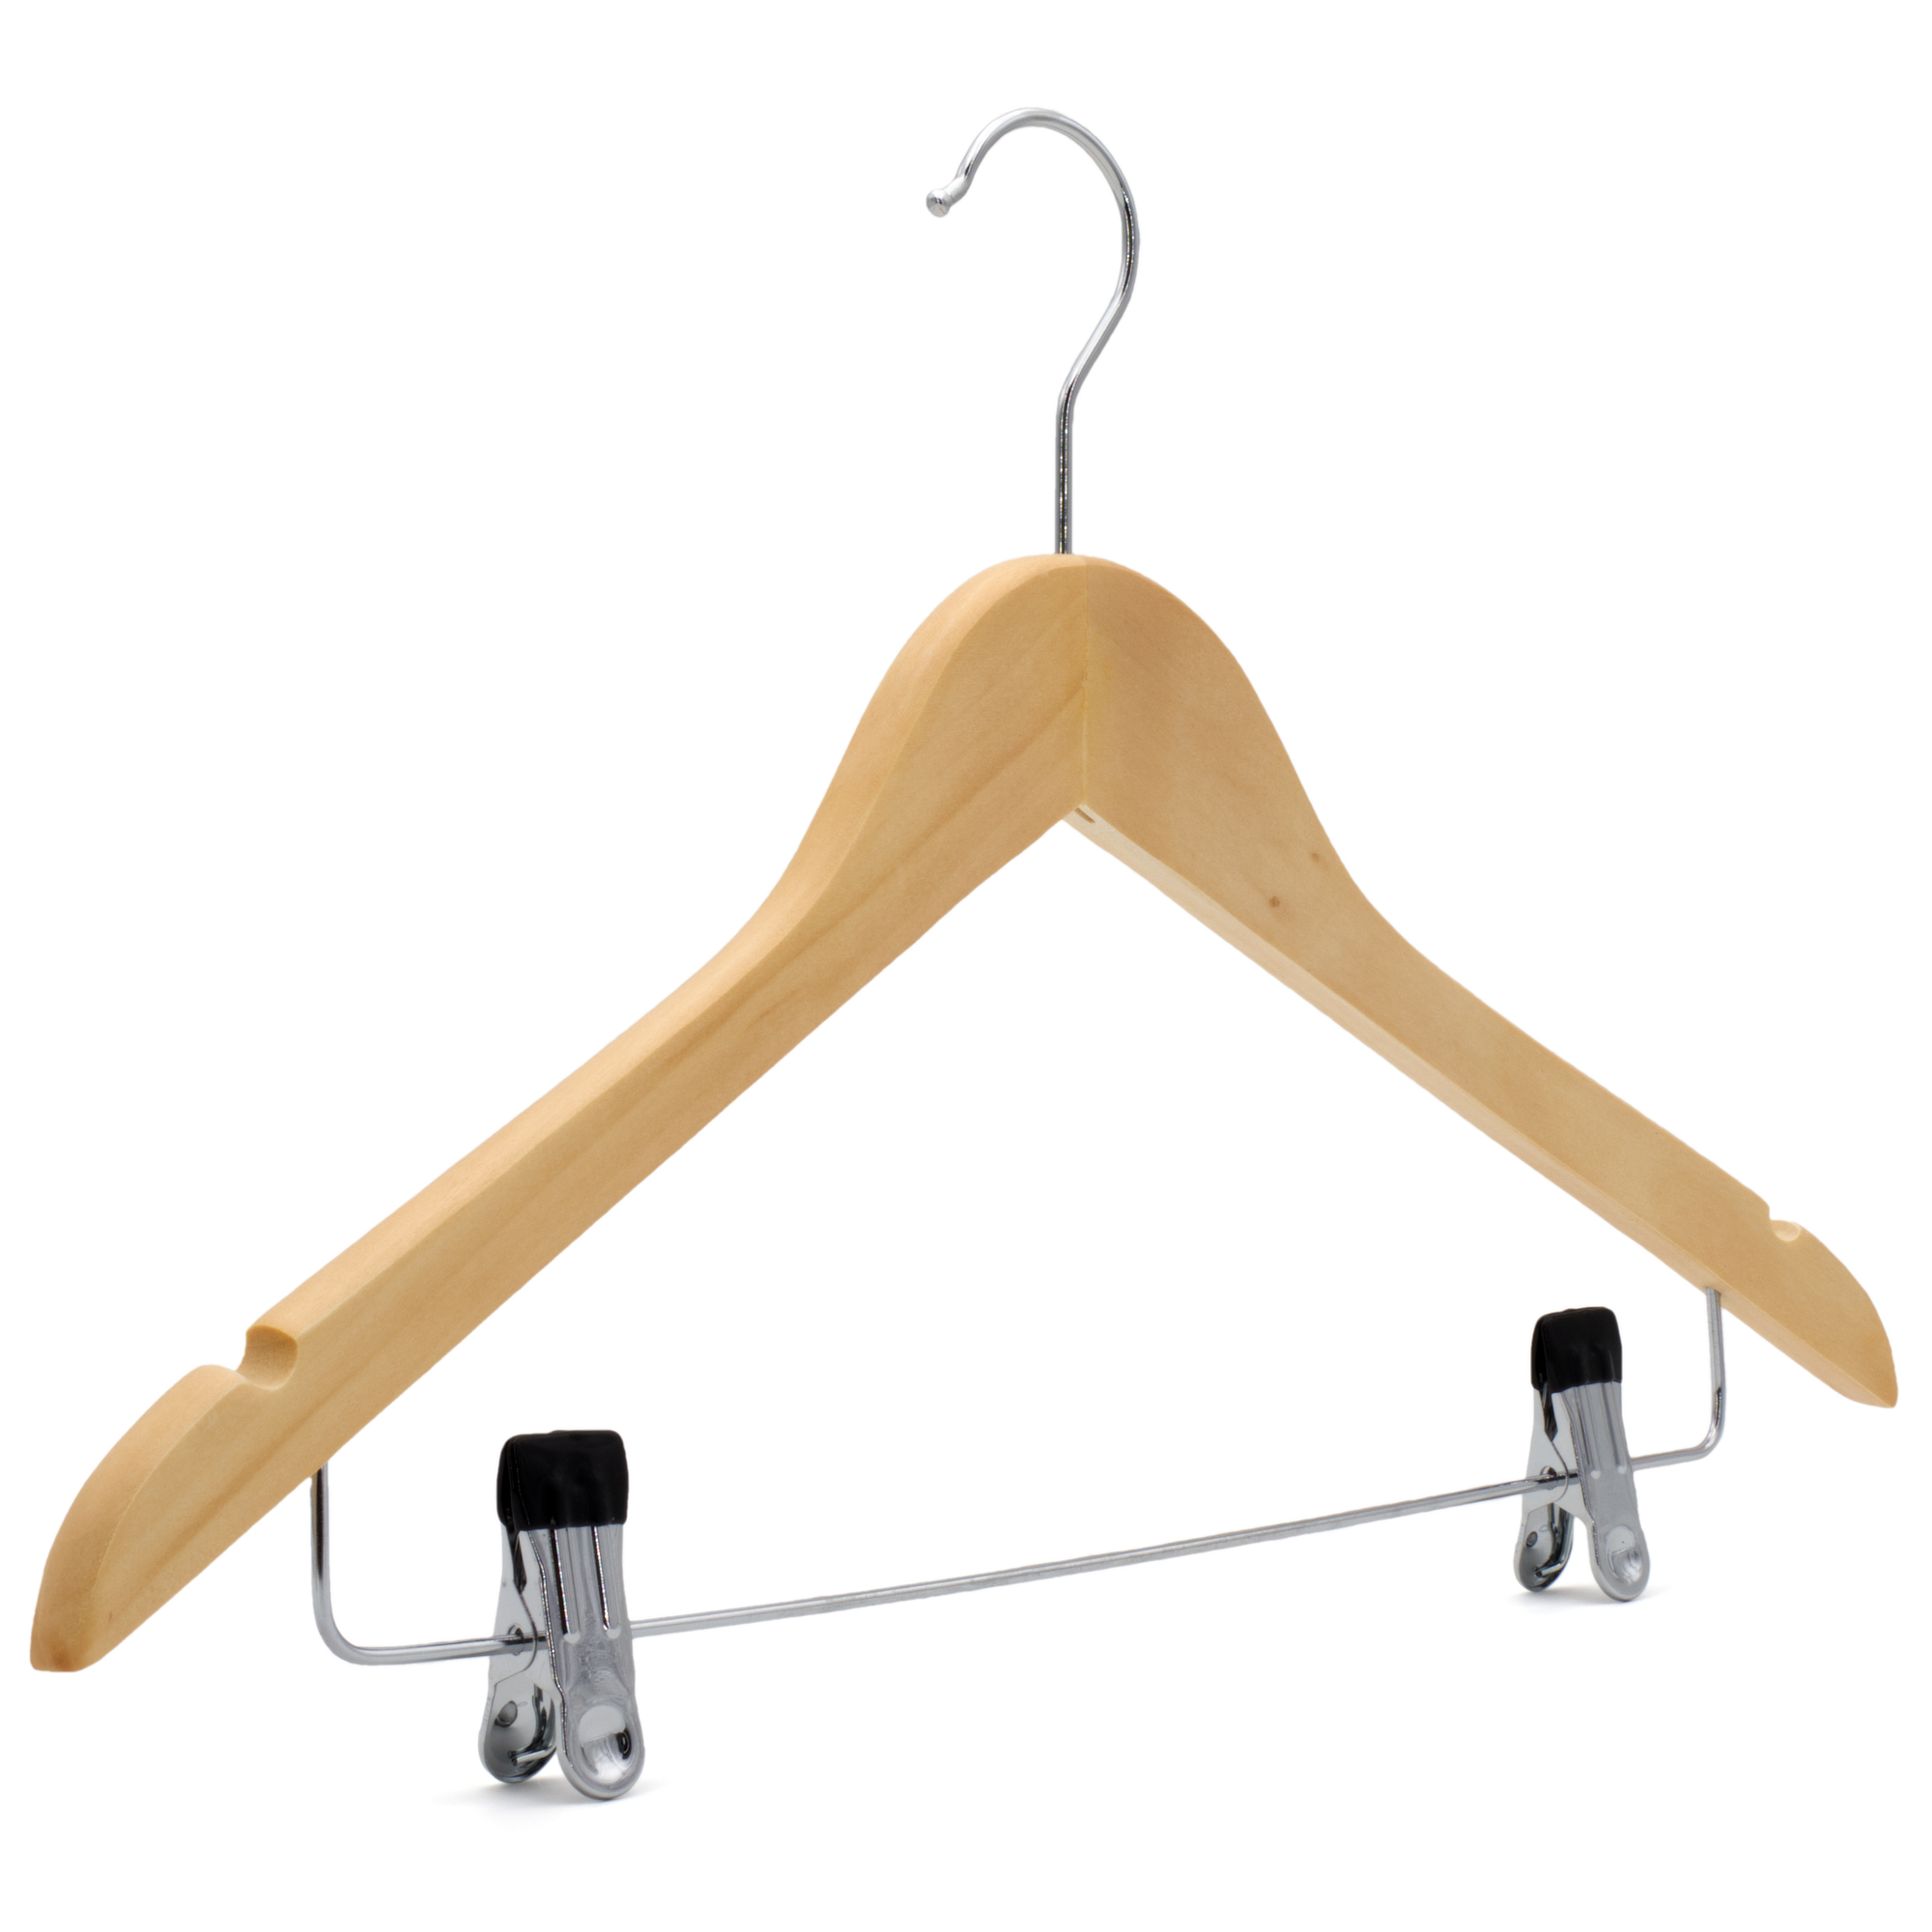 Skirts The Hanger Store 5 Wooden Suit Coat Clothes Hangers with bar and clips for Trousers Shirts 